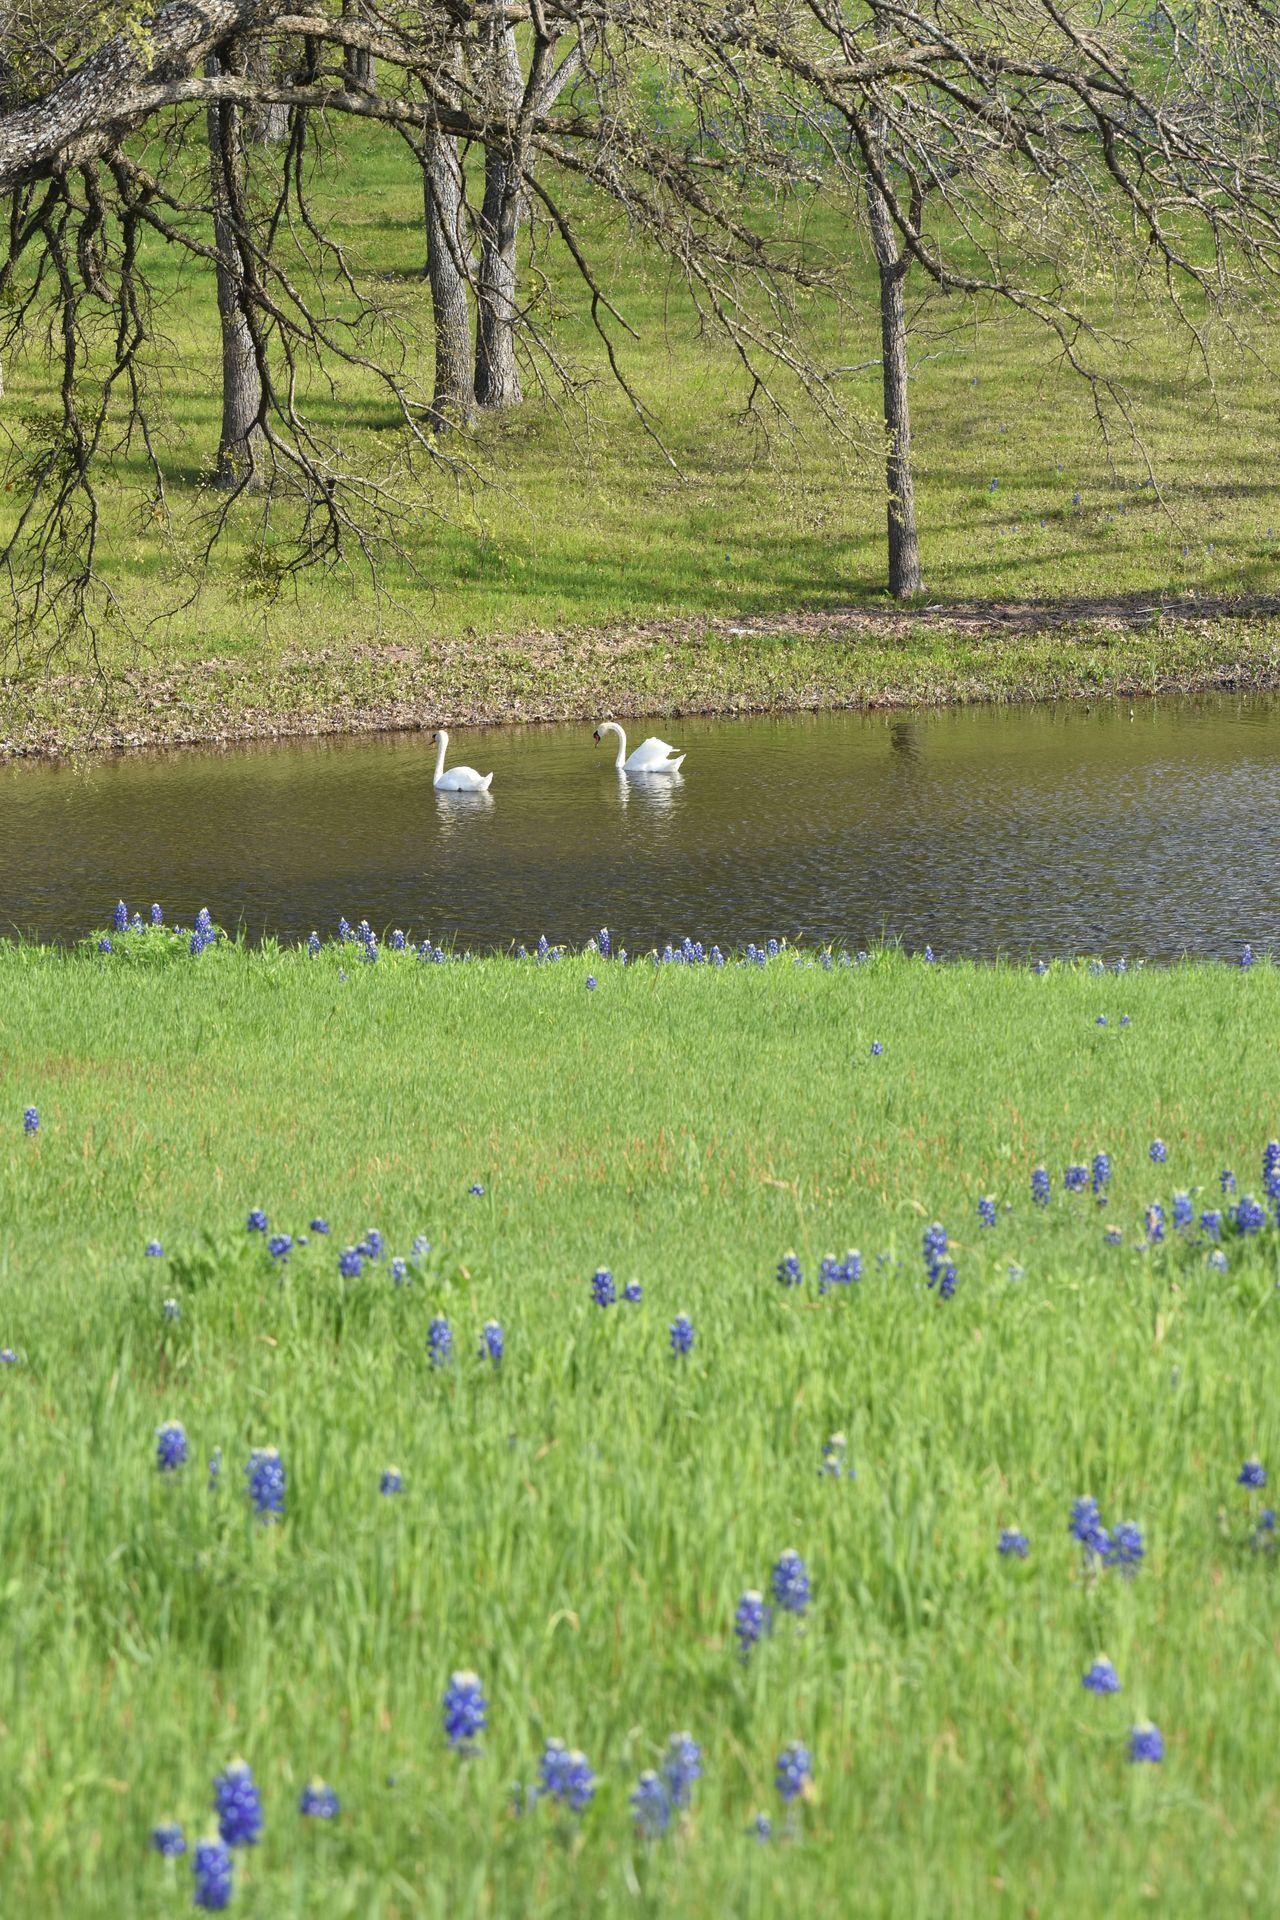 Some bluebonnets in a field with a pond in the background. Two swams are swimming in the pond.